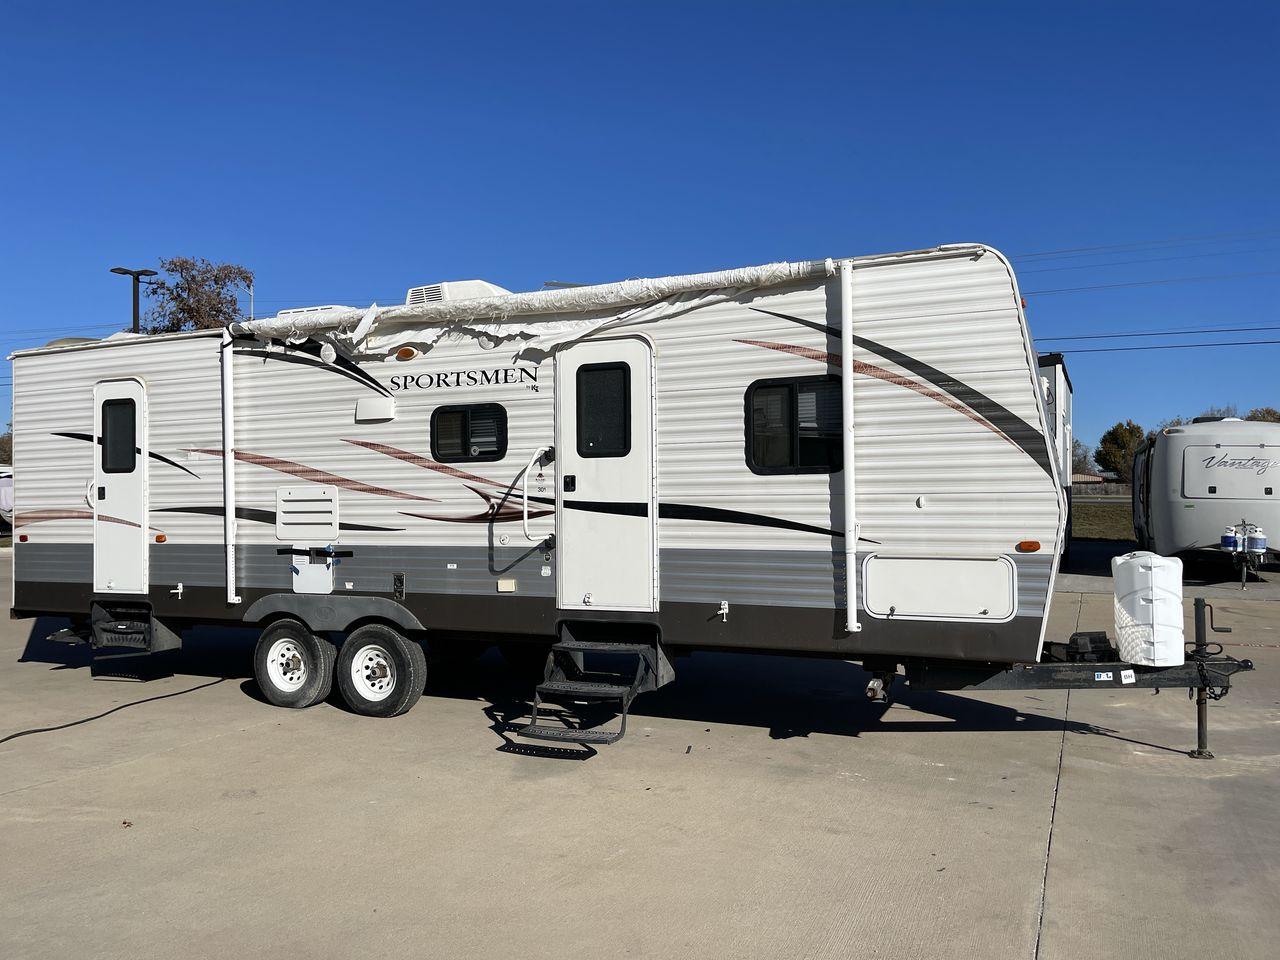 2013 WHITE KZ SPORTZMEN 301BH (4EZTS3029D5) , Length: 32.5 ft. | Dry Weight: 6,280 lbs. | Gross Weight: 8,000 lbs. | Slides: 1 transmission, located at 4319 N Main Street, Cleburne, TX, 76033, (817) 221-0660, 32.435829, -97.384178 - This 2013 KZ Sportsmen 301BH travel trailer is the perfect lightweight camper for when you want to travel in style. It measures 32.5 ft in length, 8 ft in width, and 11.33 ft in height. This has a dry weight of 6,280 lbs with a payload capacity of 1,720 lbs. The GVWR of this trailer is 8,000 lbs, an - Photo #22